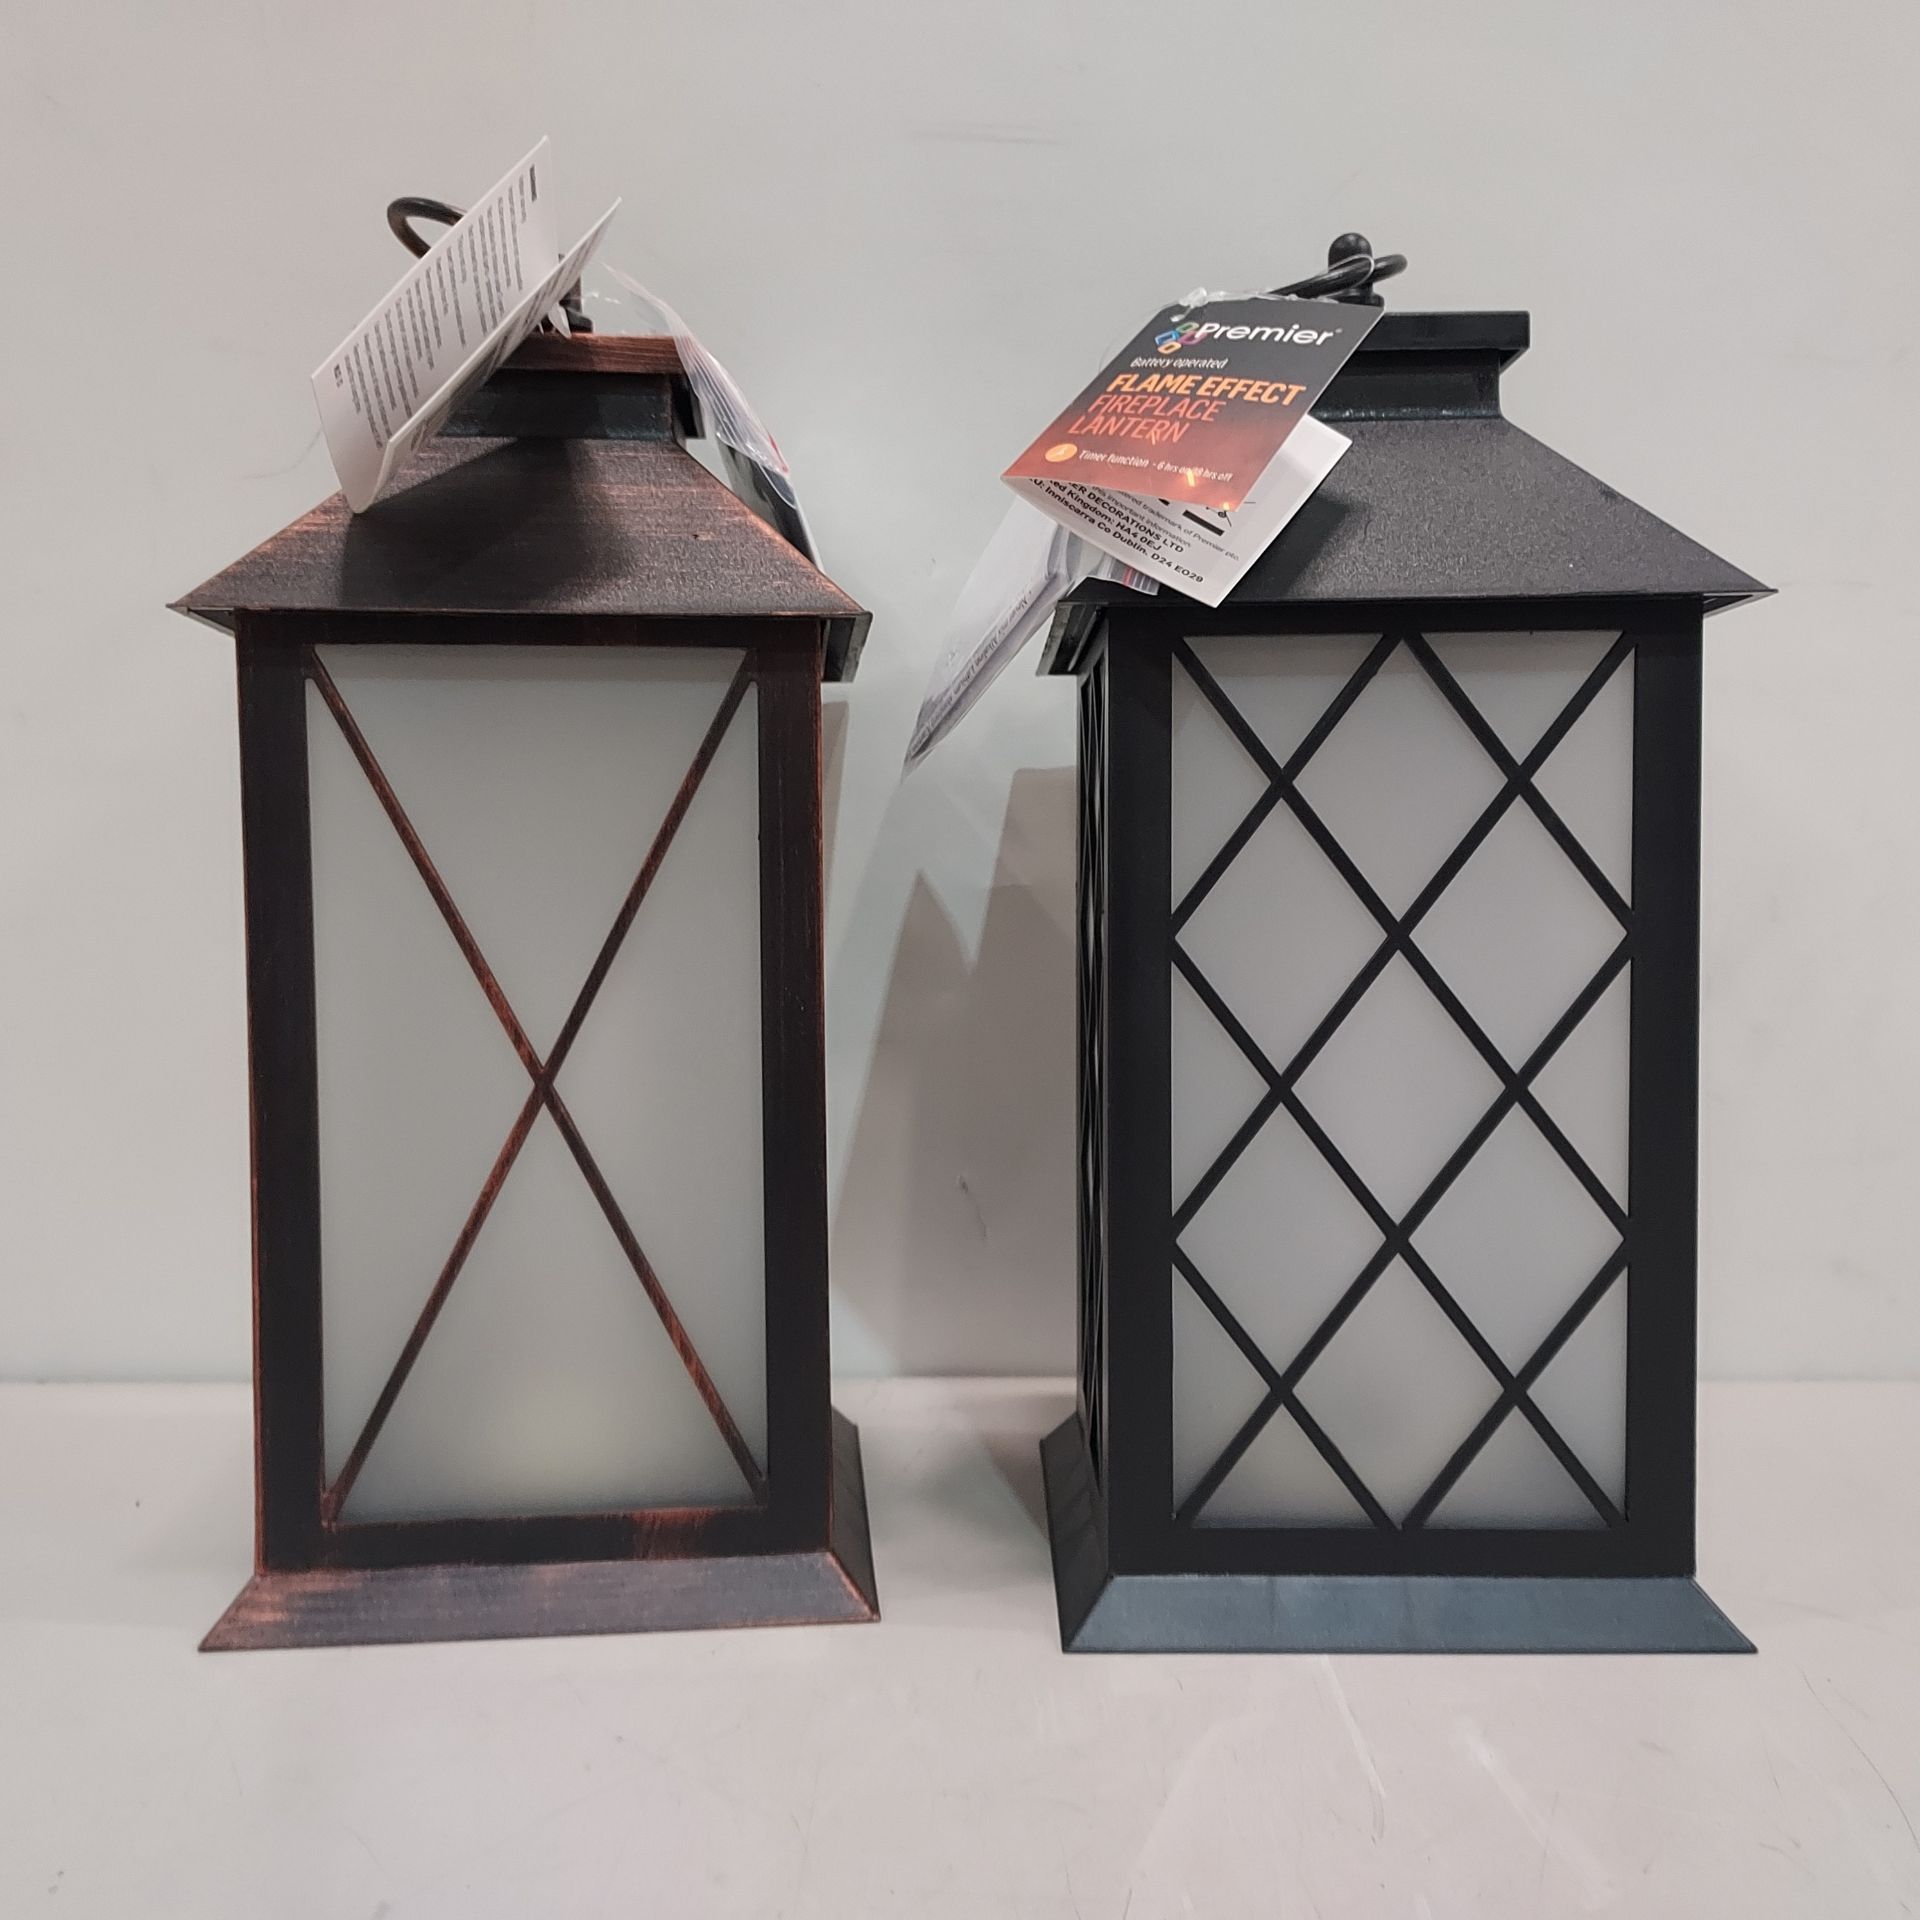 96 X BRAND NEW PREMIER BATTERY OPERATED 28 CM WARM FLOWING FLAME EFFECT FIREPLACE LANTERN - WITH